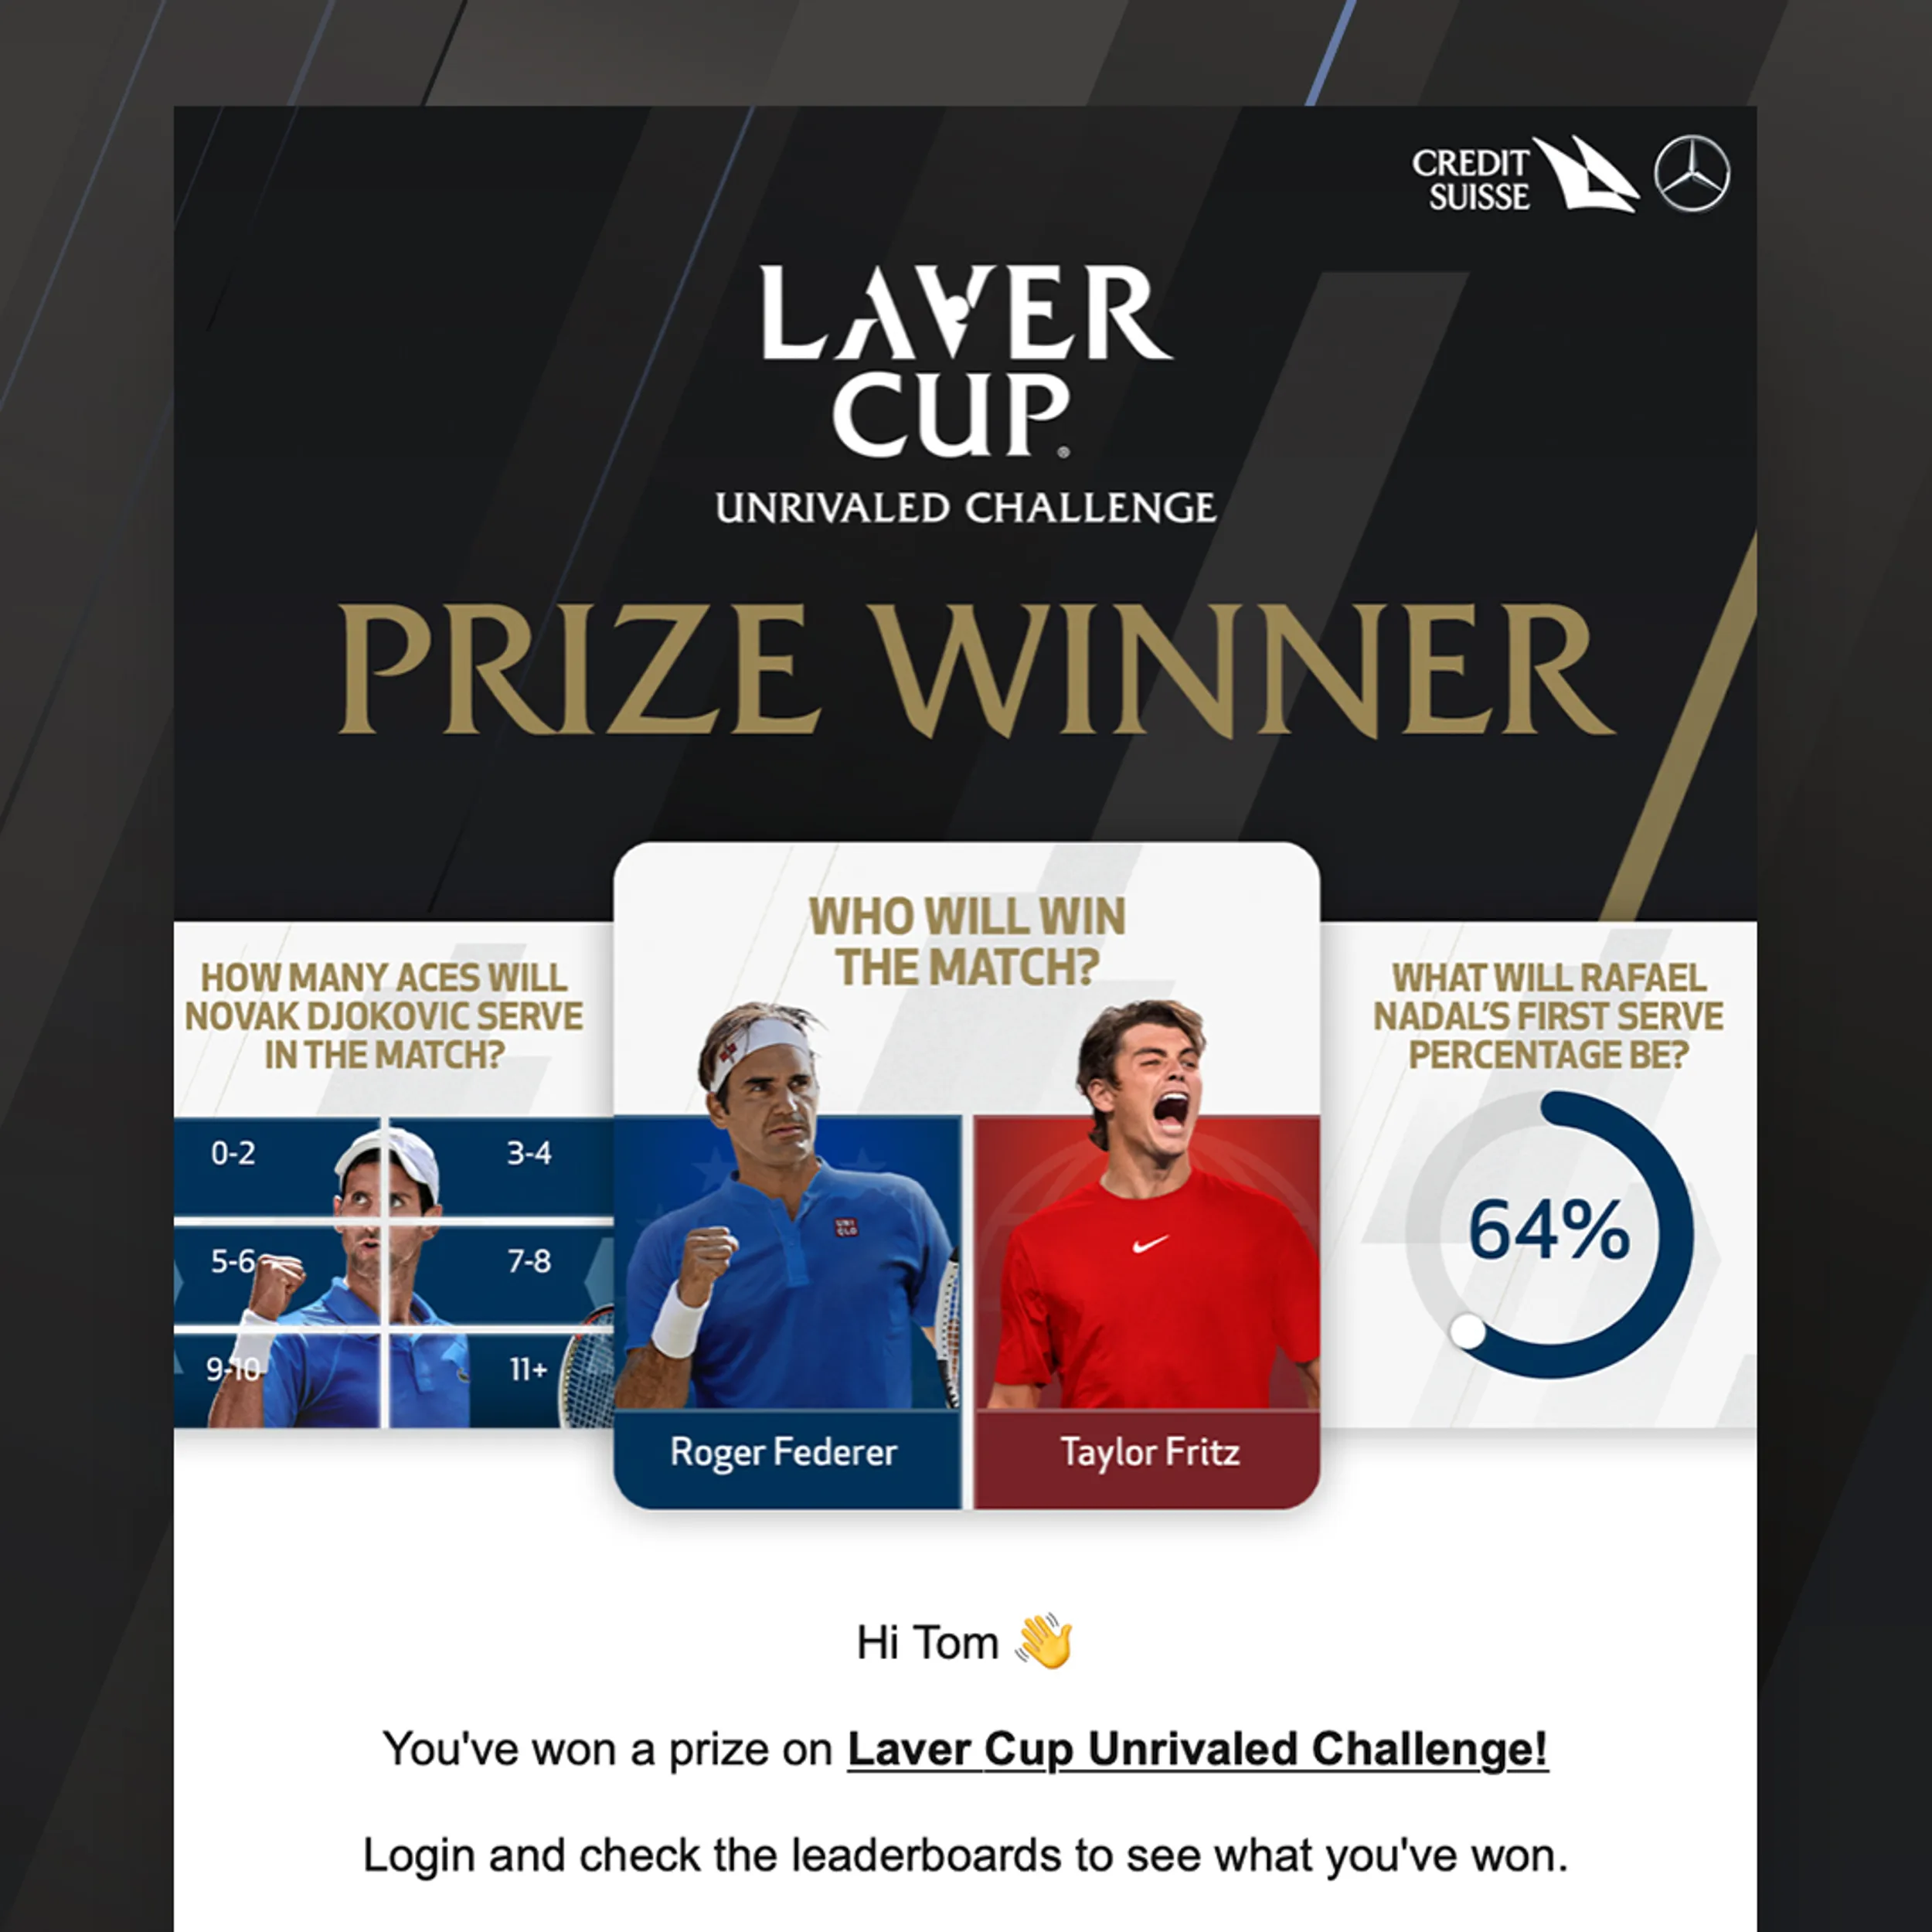 Laver Cup Carousel 3